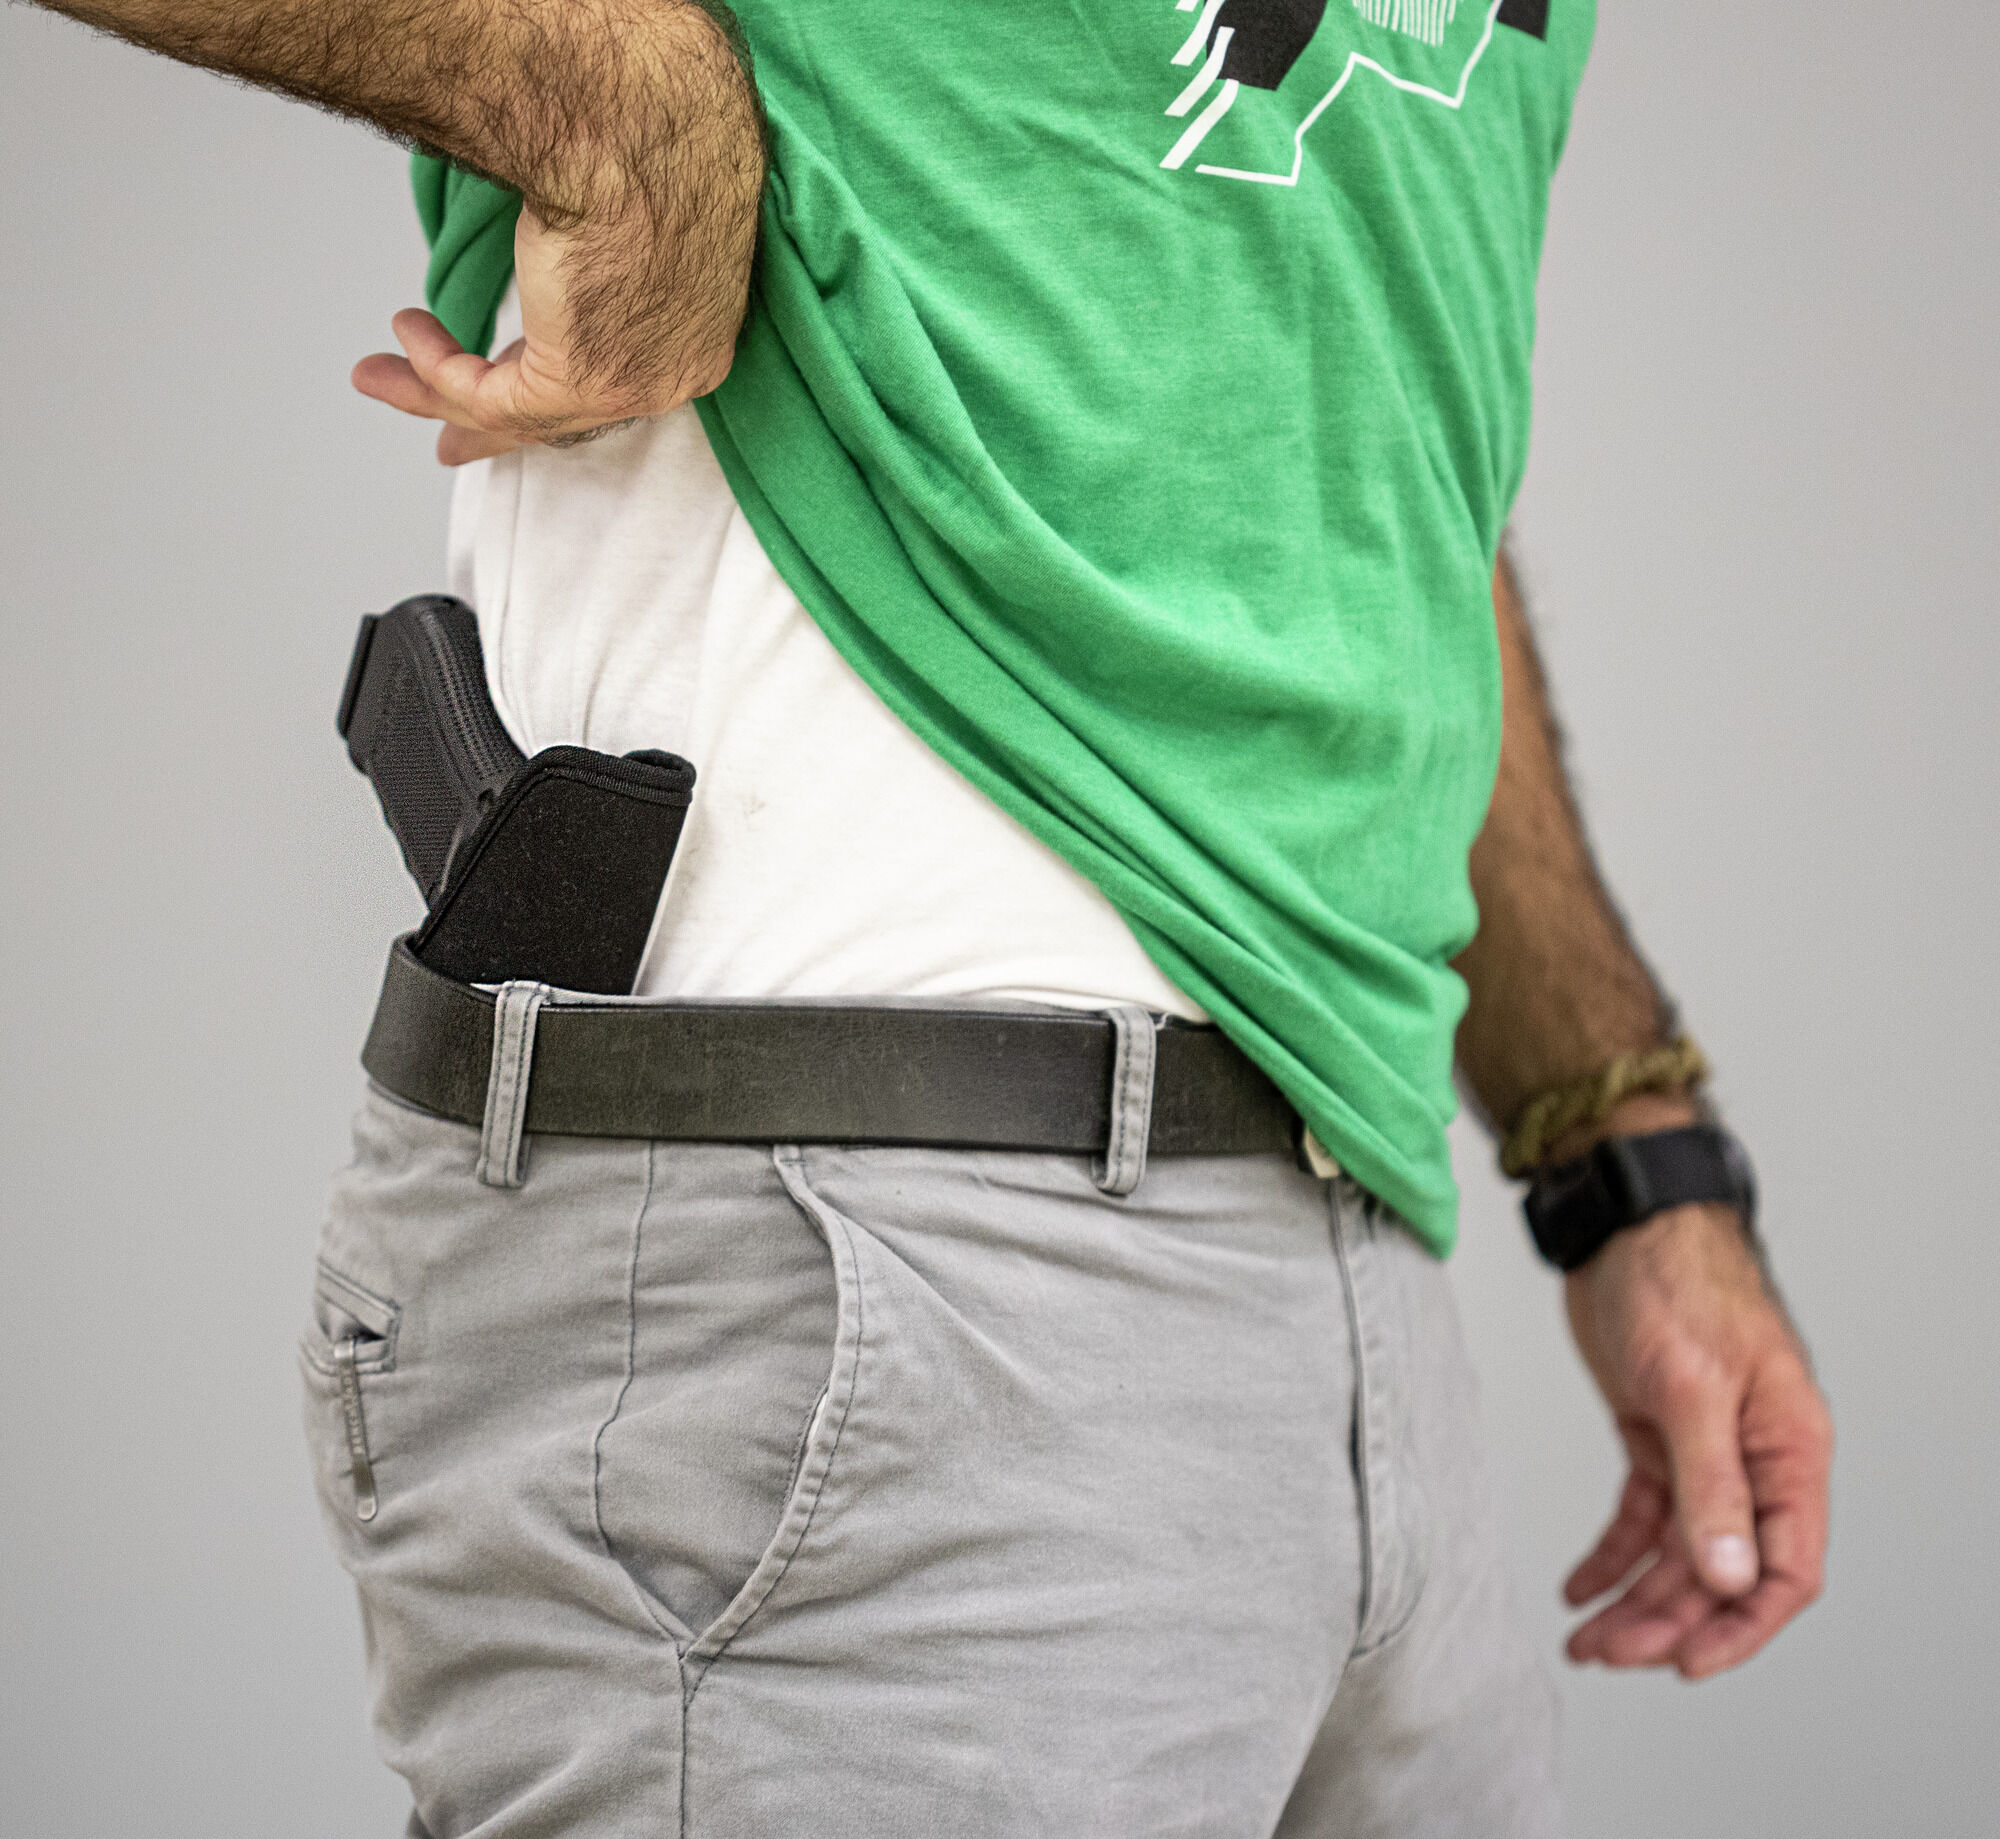 6 Best IWB Inside Waistband Holsters HandsOn Tested  Pew Pew Tactical